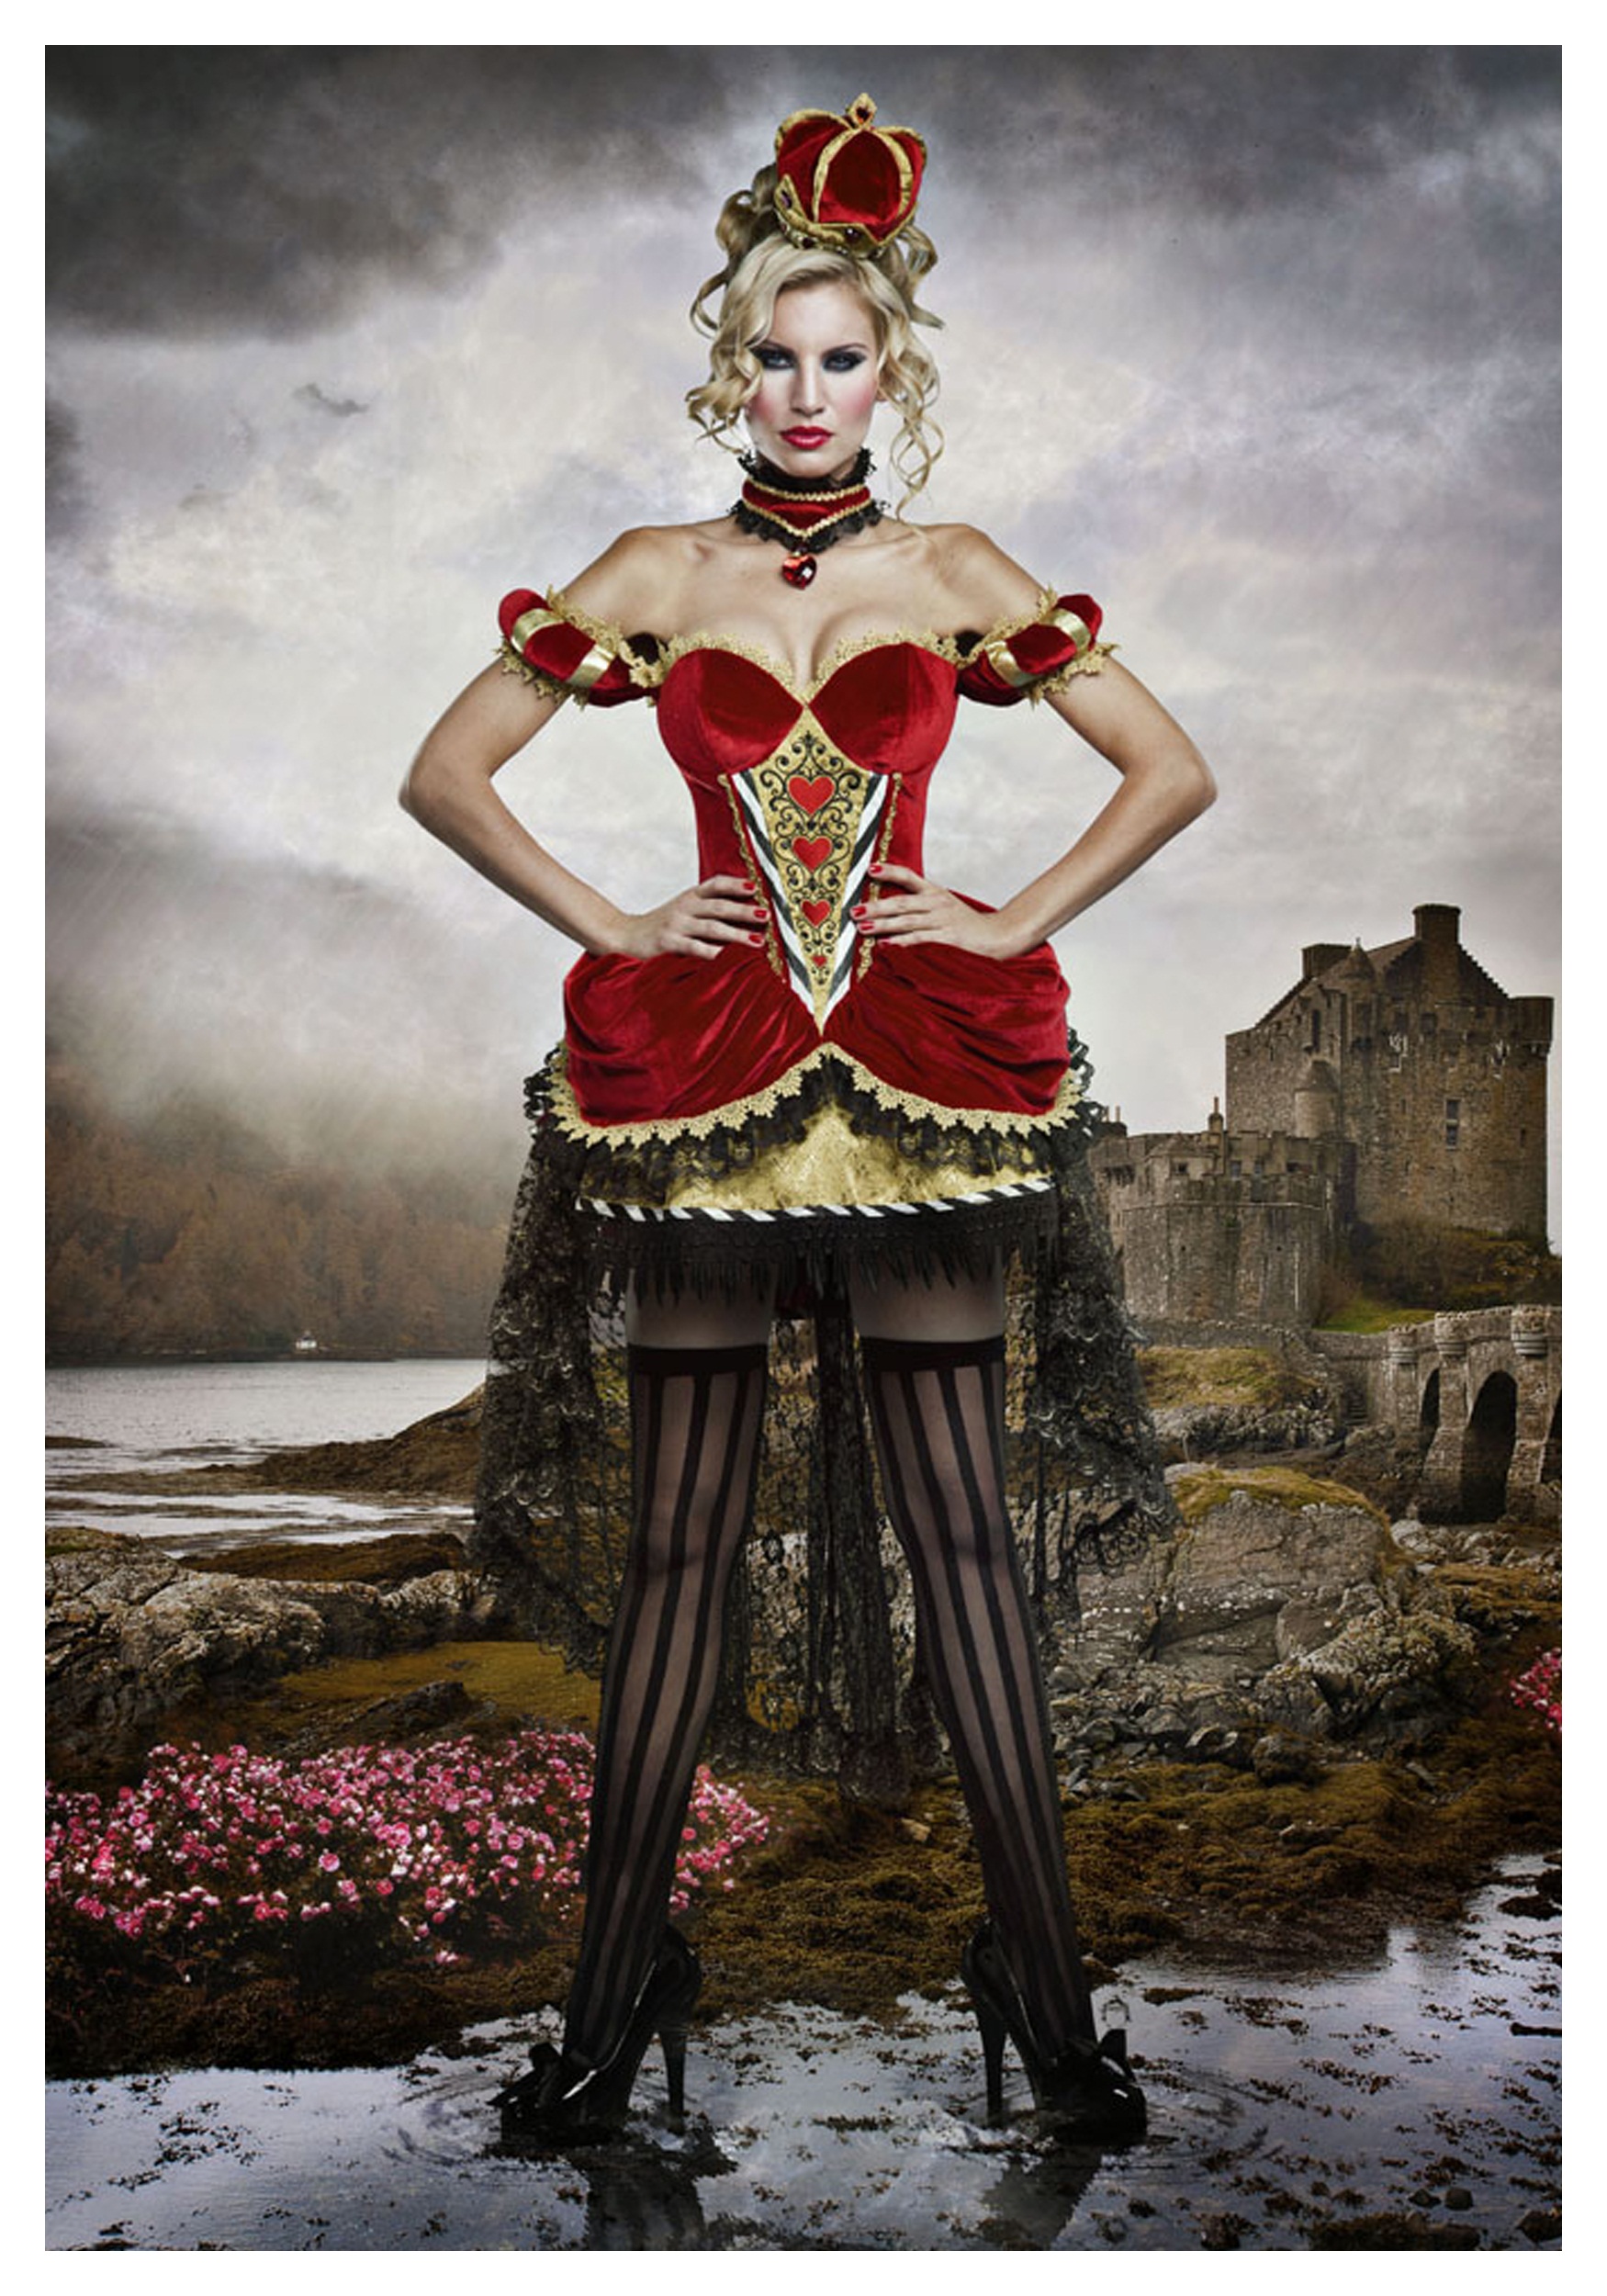 Preside over the Knave's trial in this Deluxe Queen of Hearts Costume ...